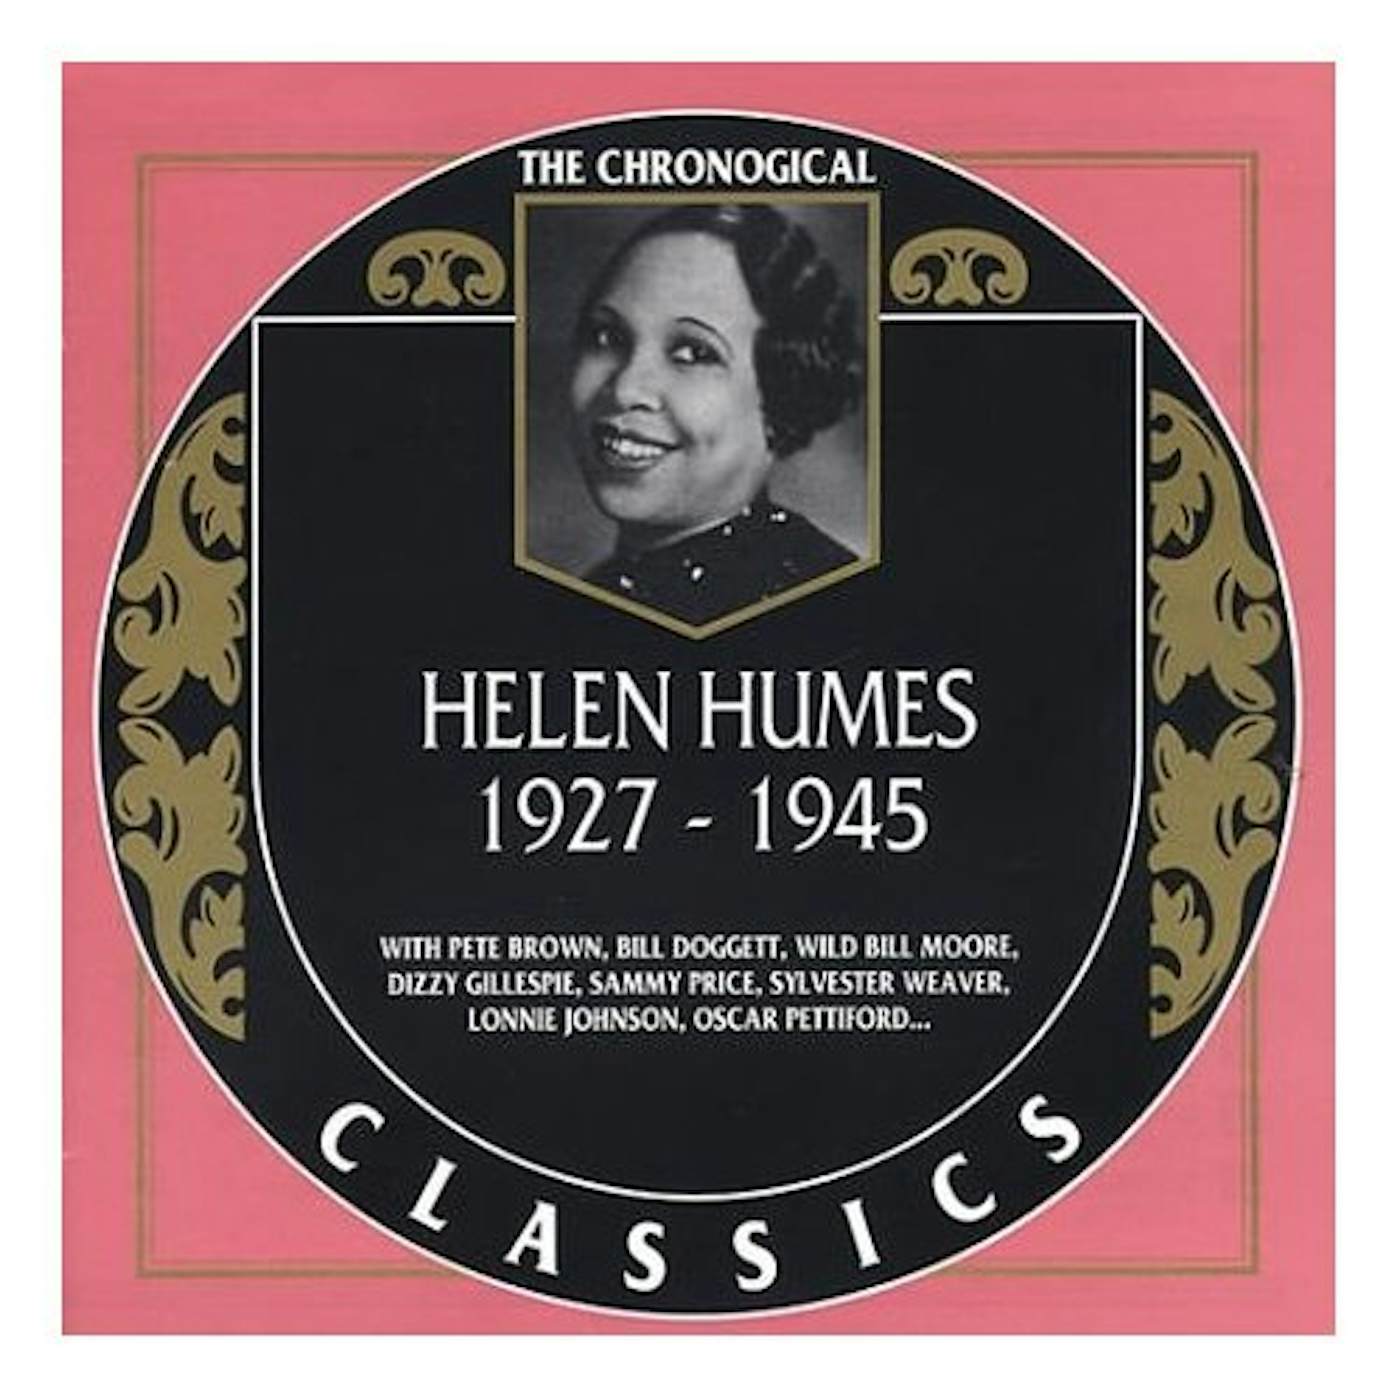 Helen Humes 1927-1945 CD